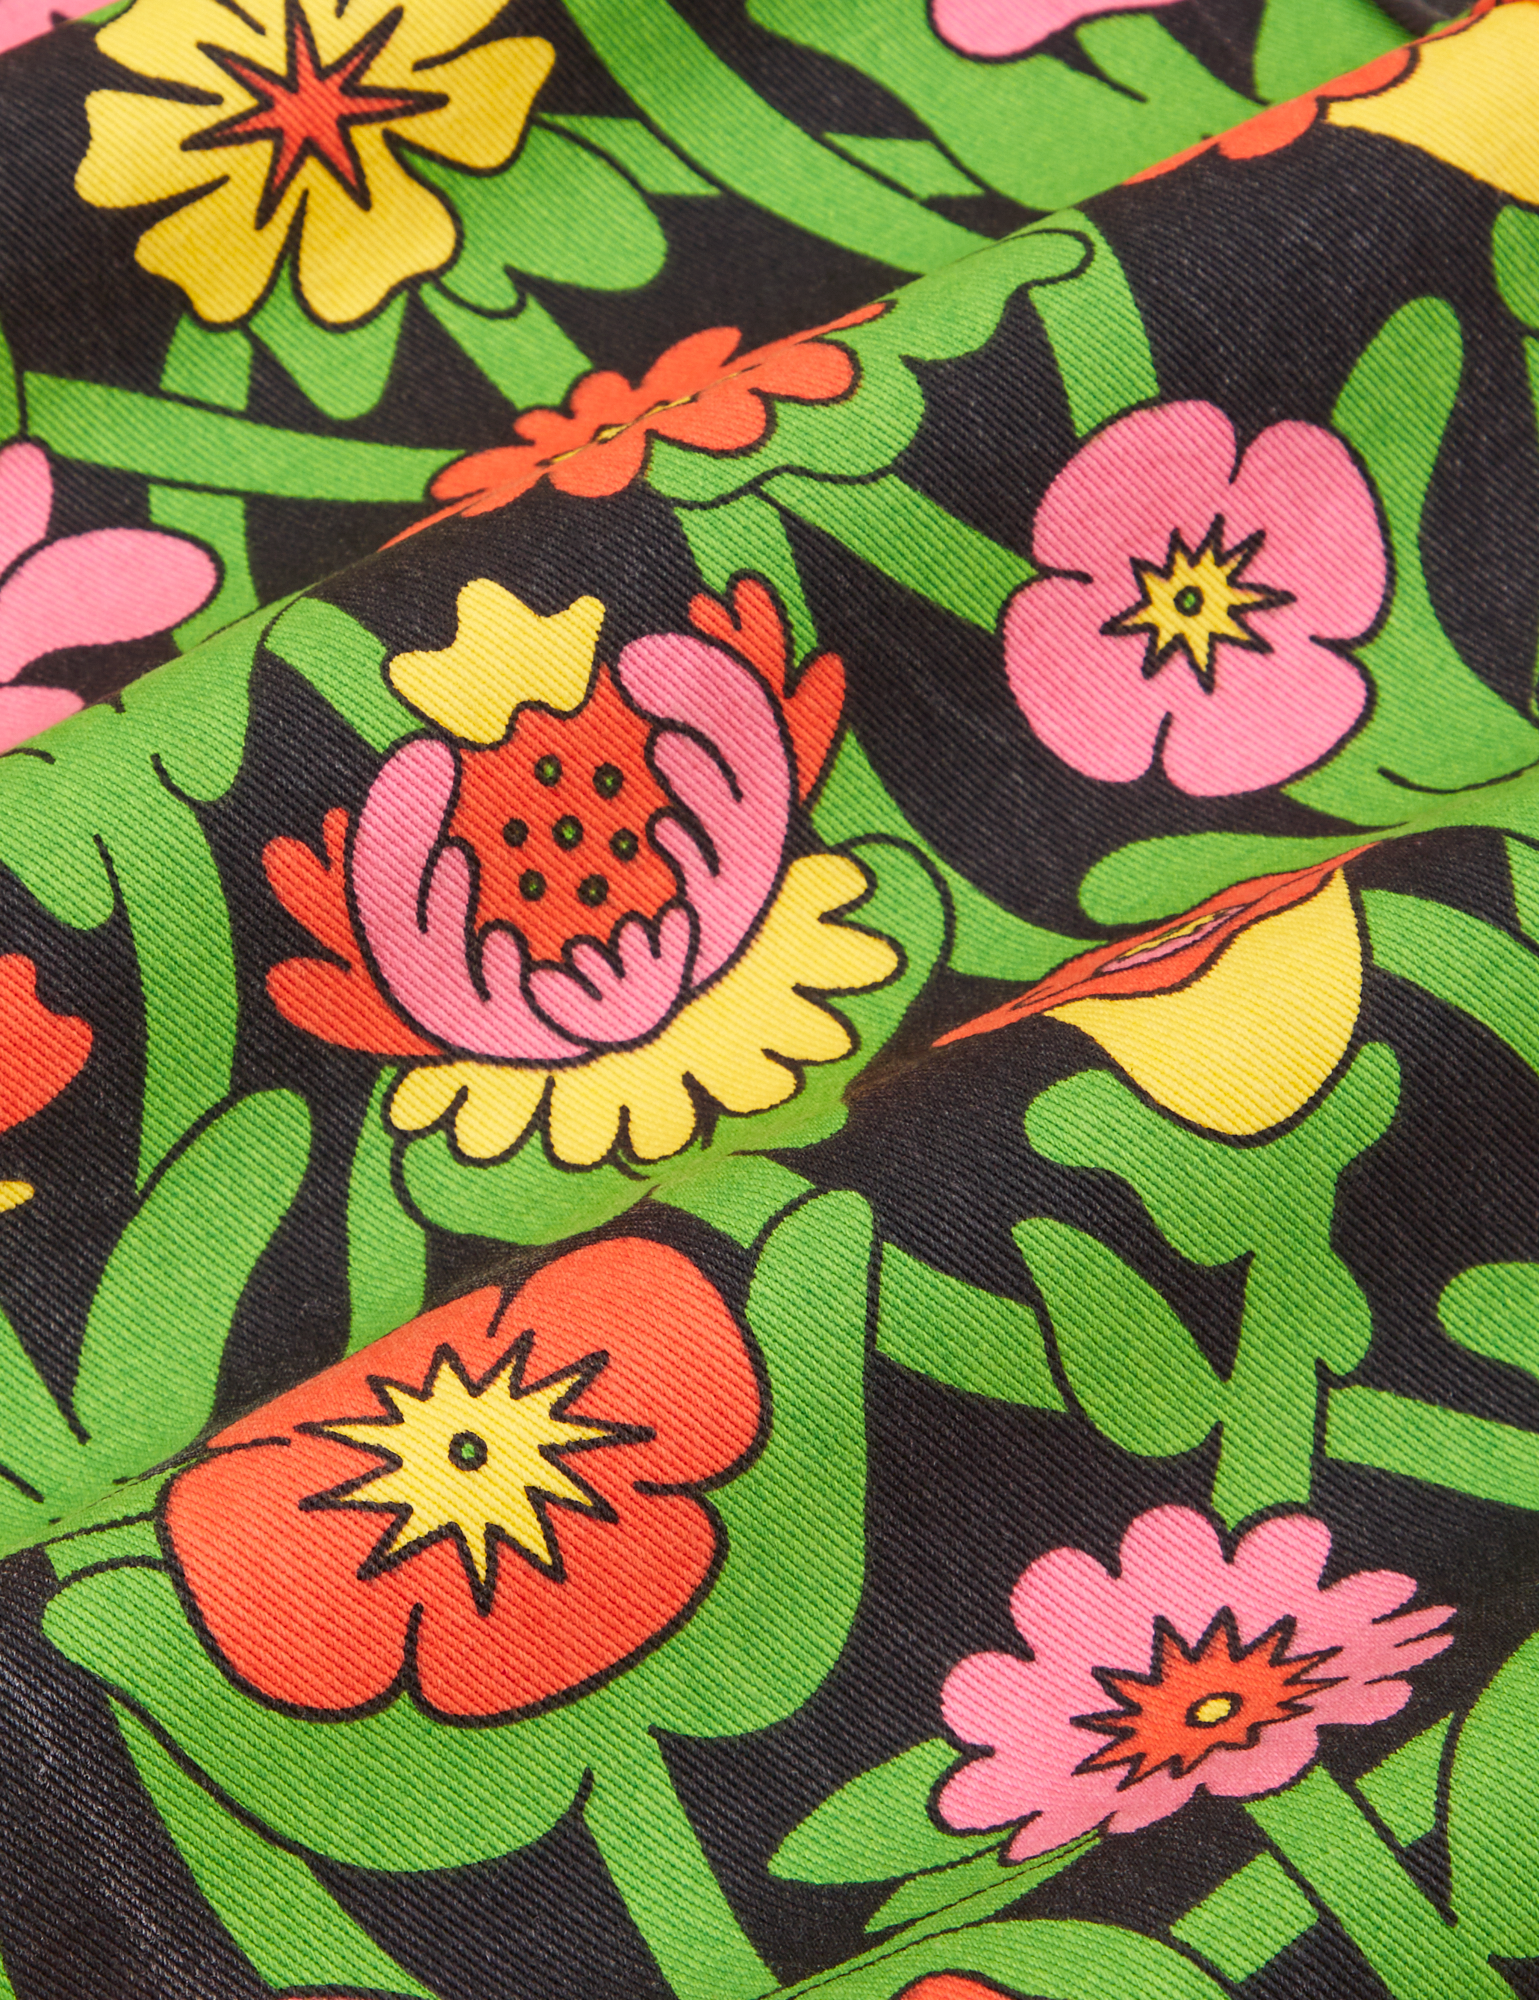 Flower Tangle Jumpsuit fabric detail close up